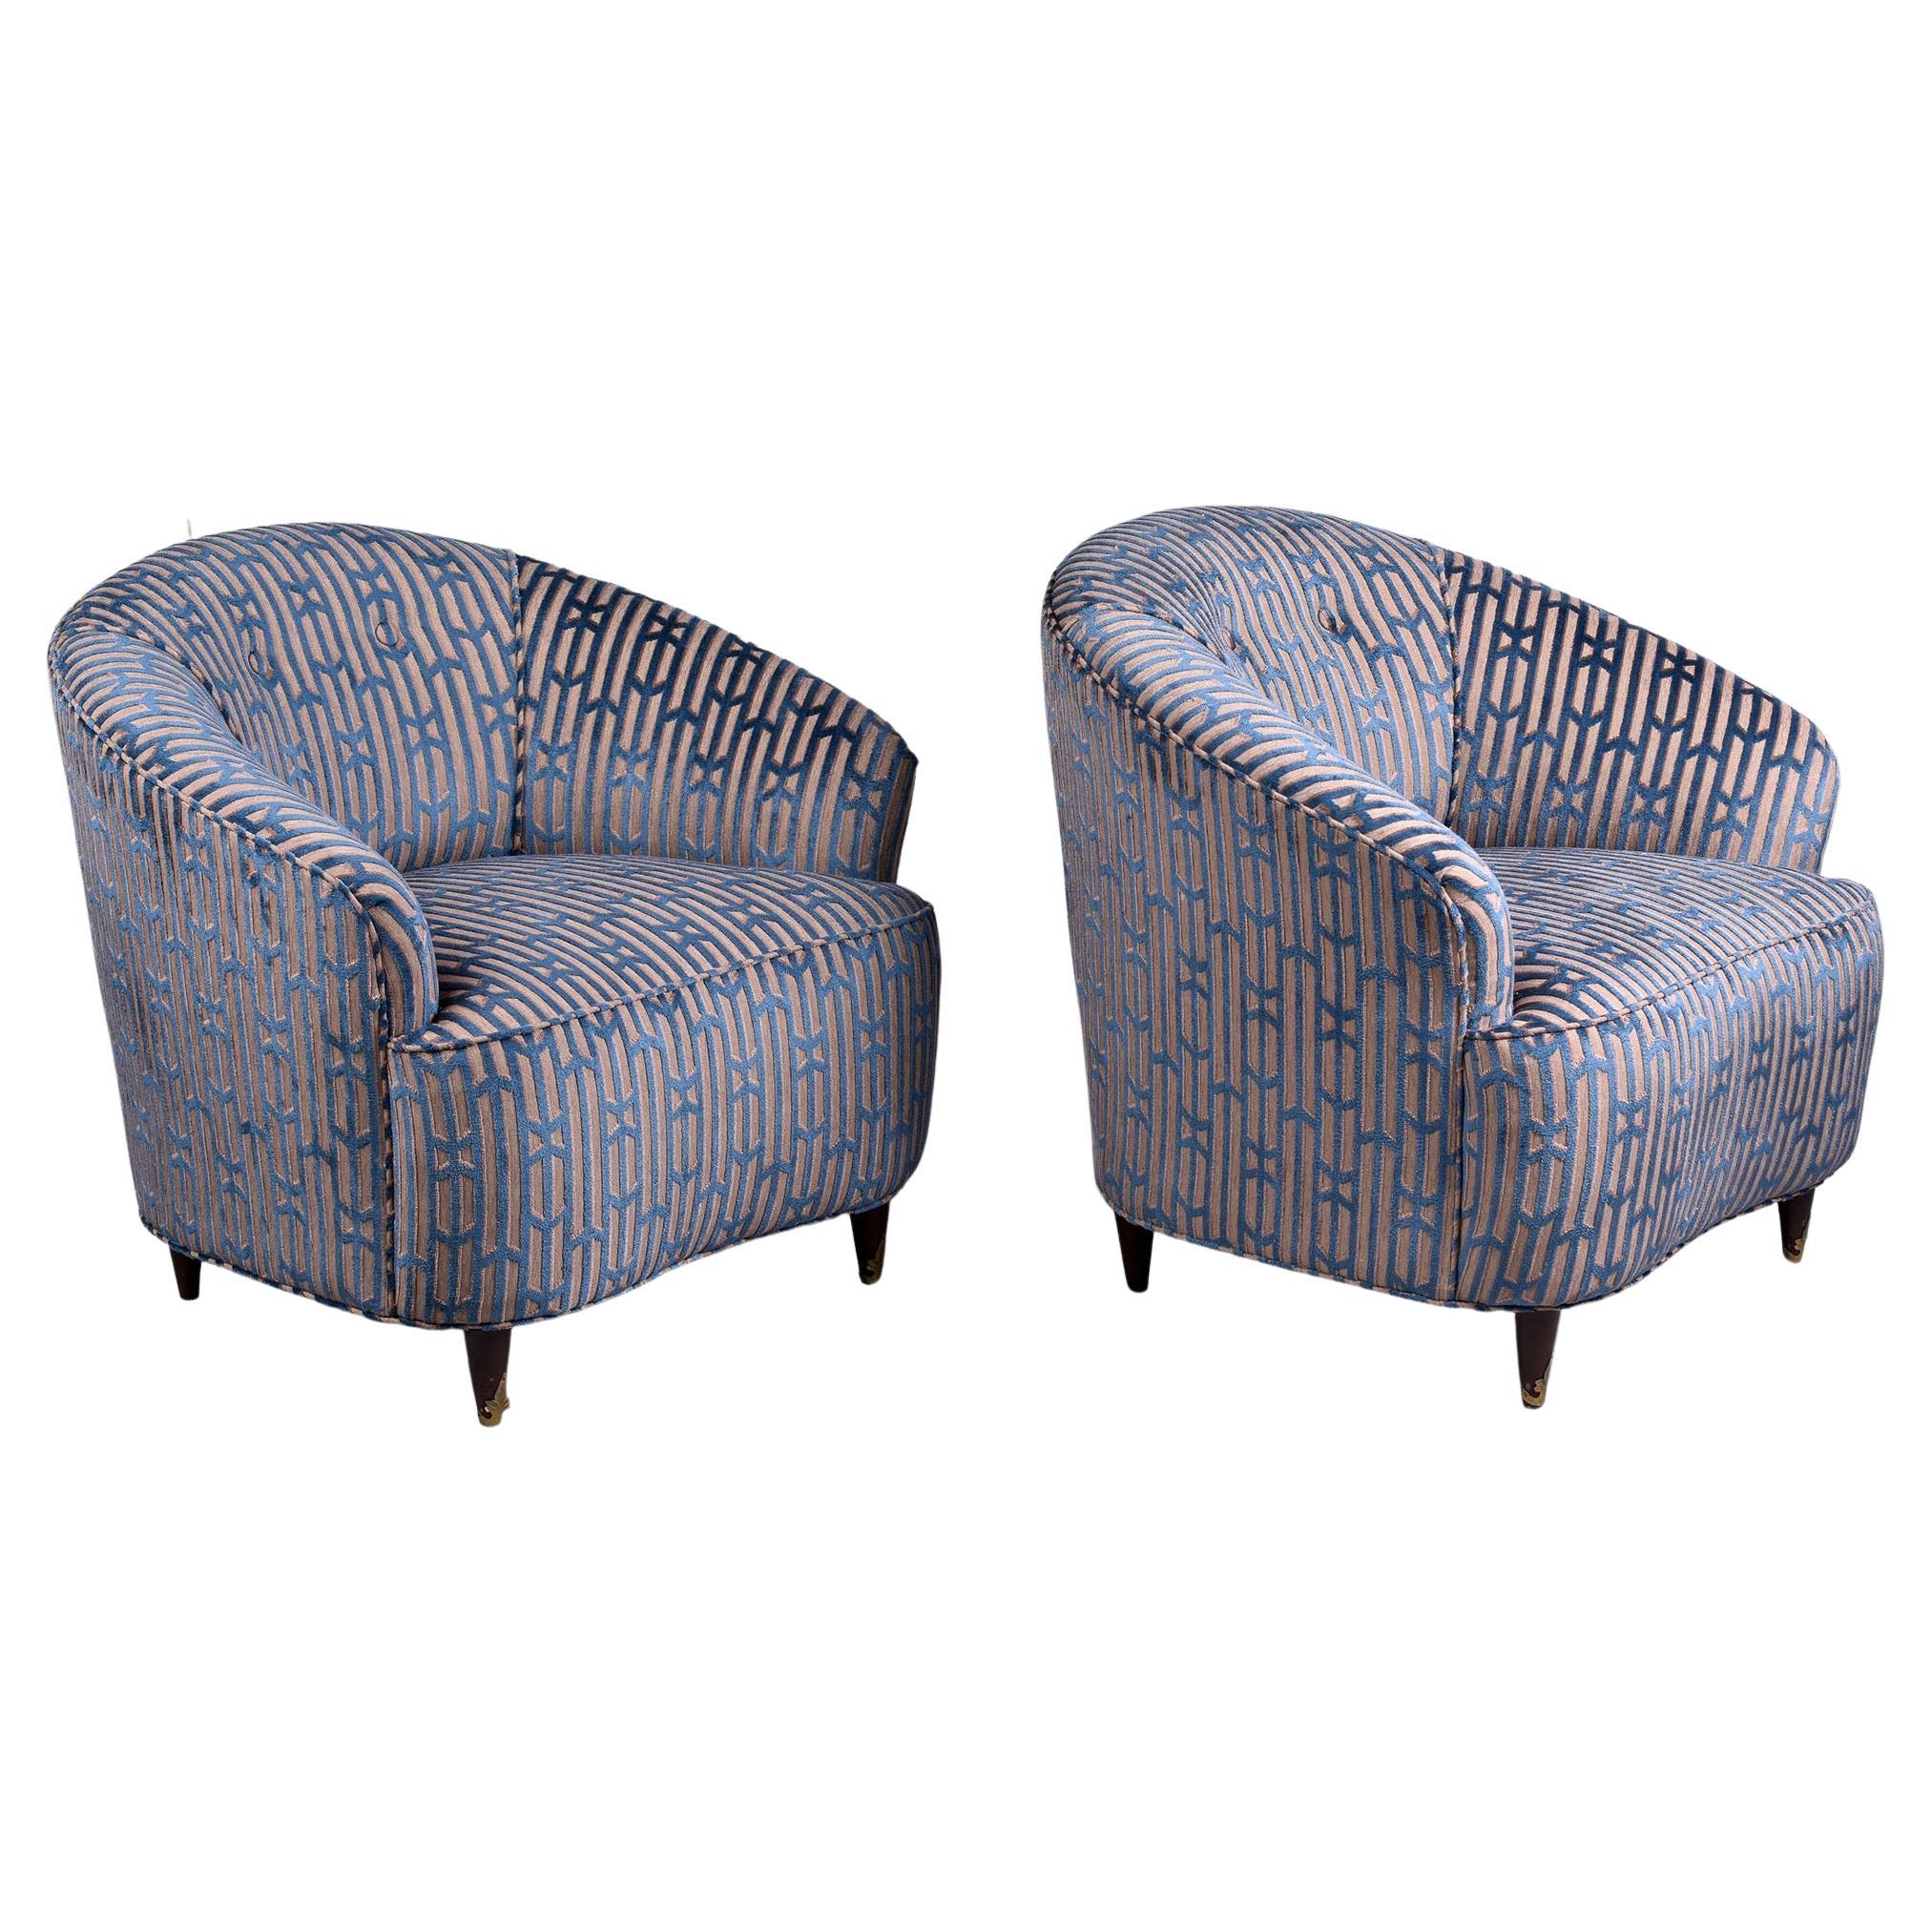 Pair of Mid Century Italian Tub Chairs with New Upholstery